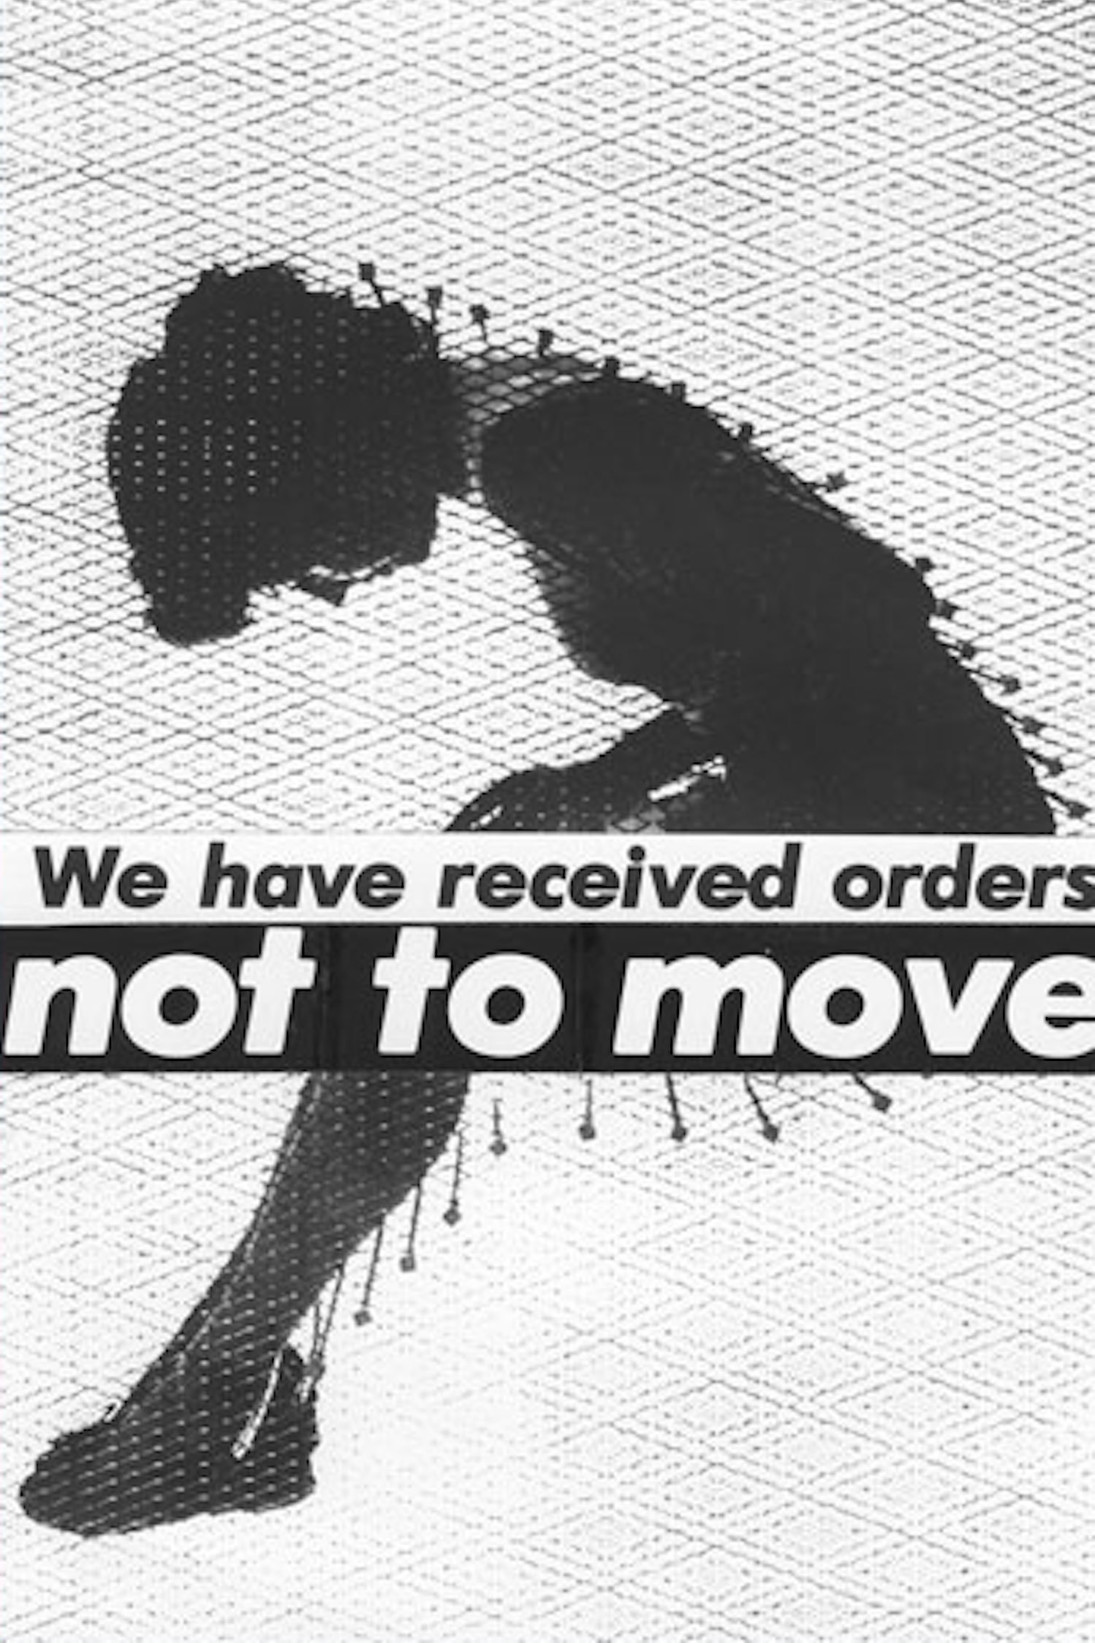 Barbara Kruger, Unititled (We have received orders not to move), 1982